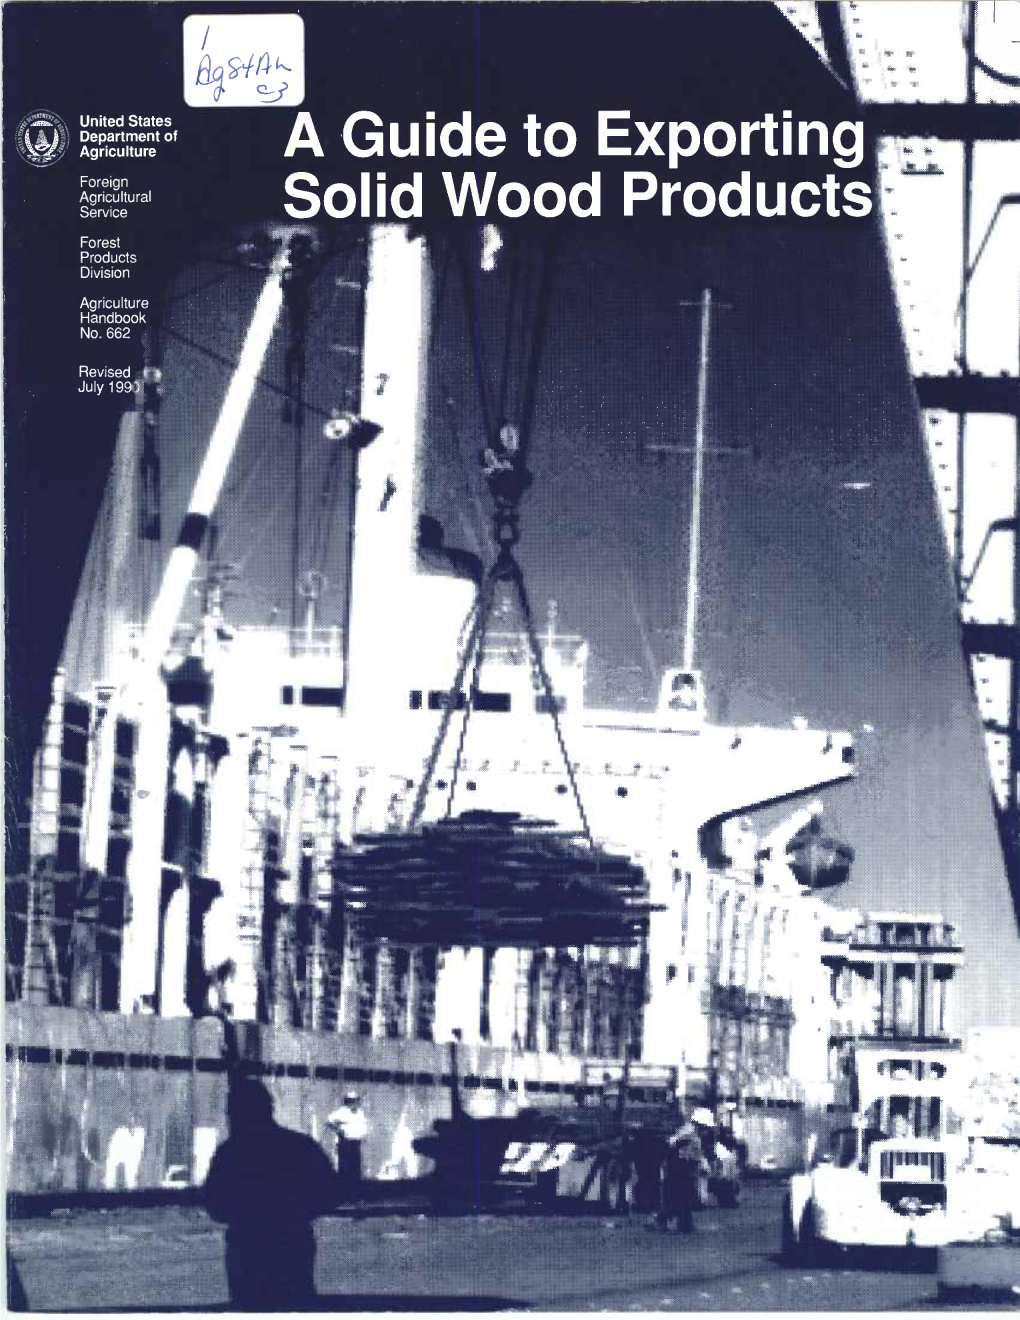 A Guide to Exporting Solid Wood Products